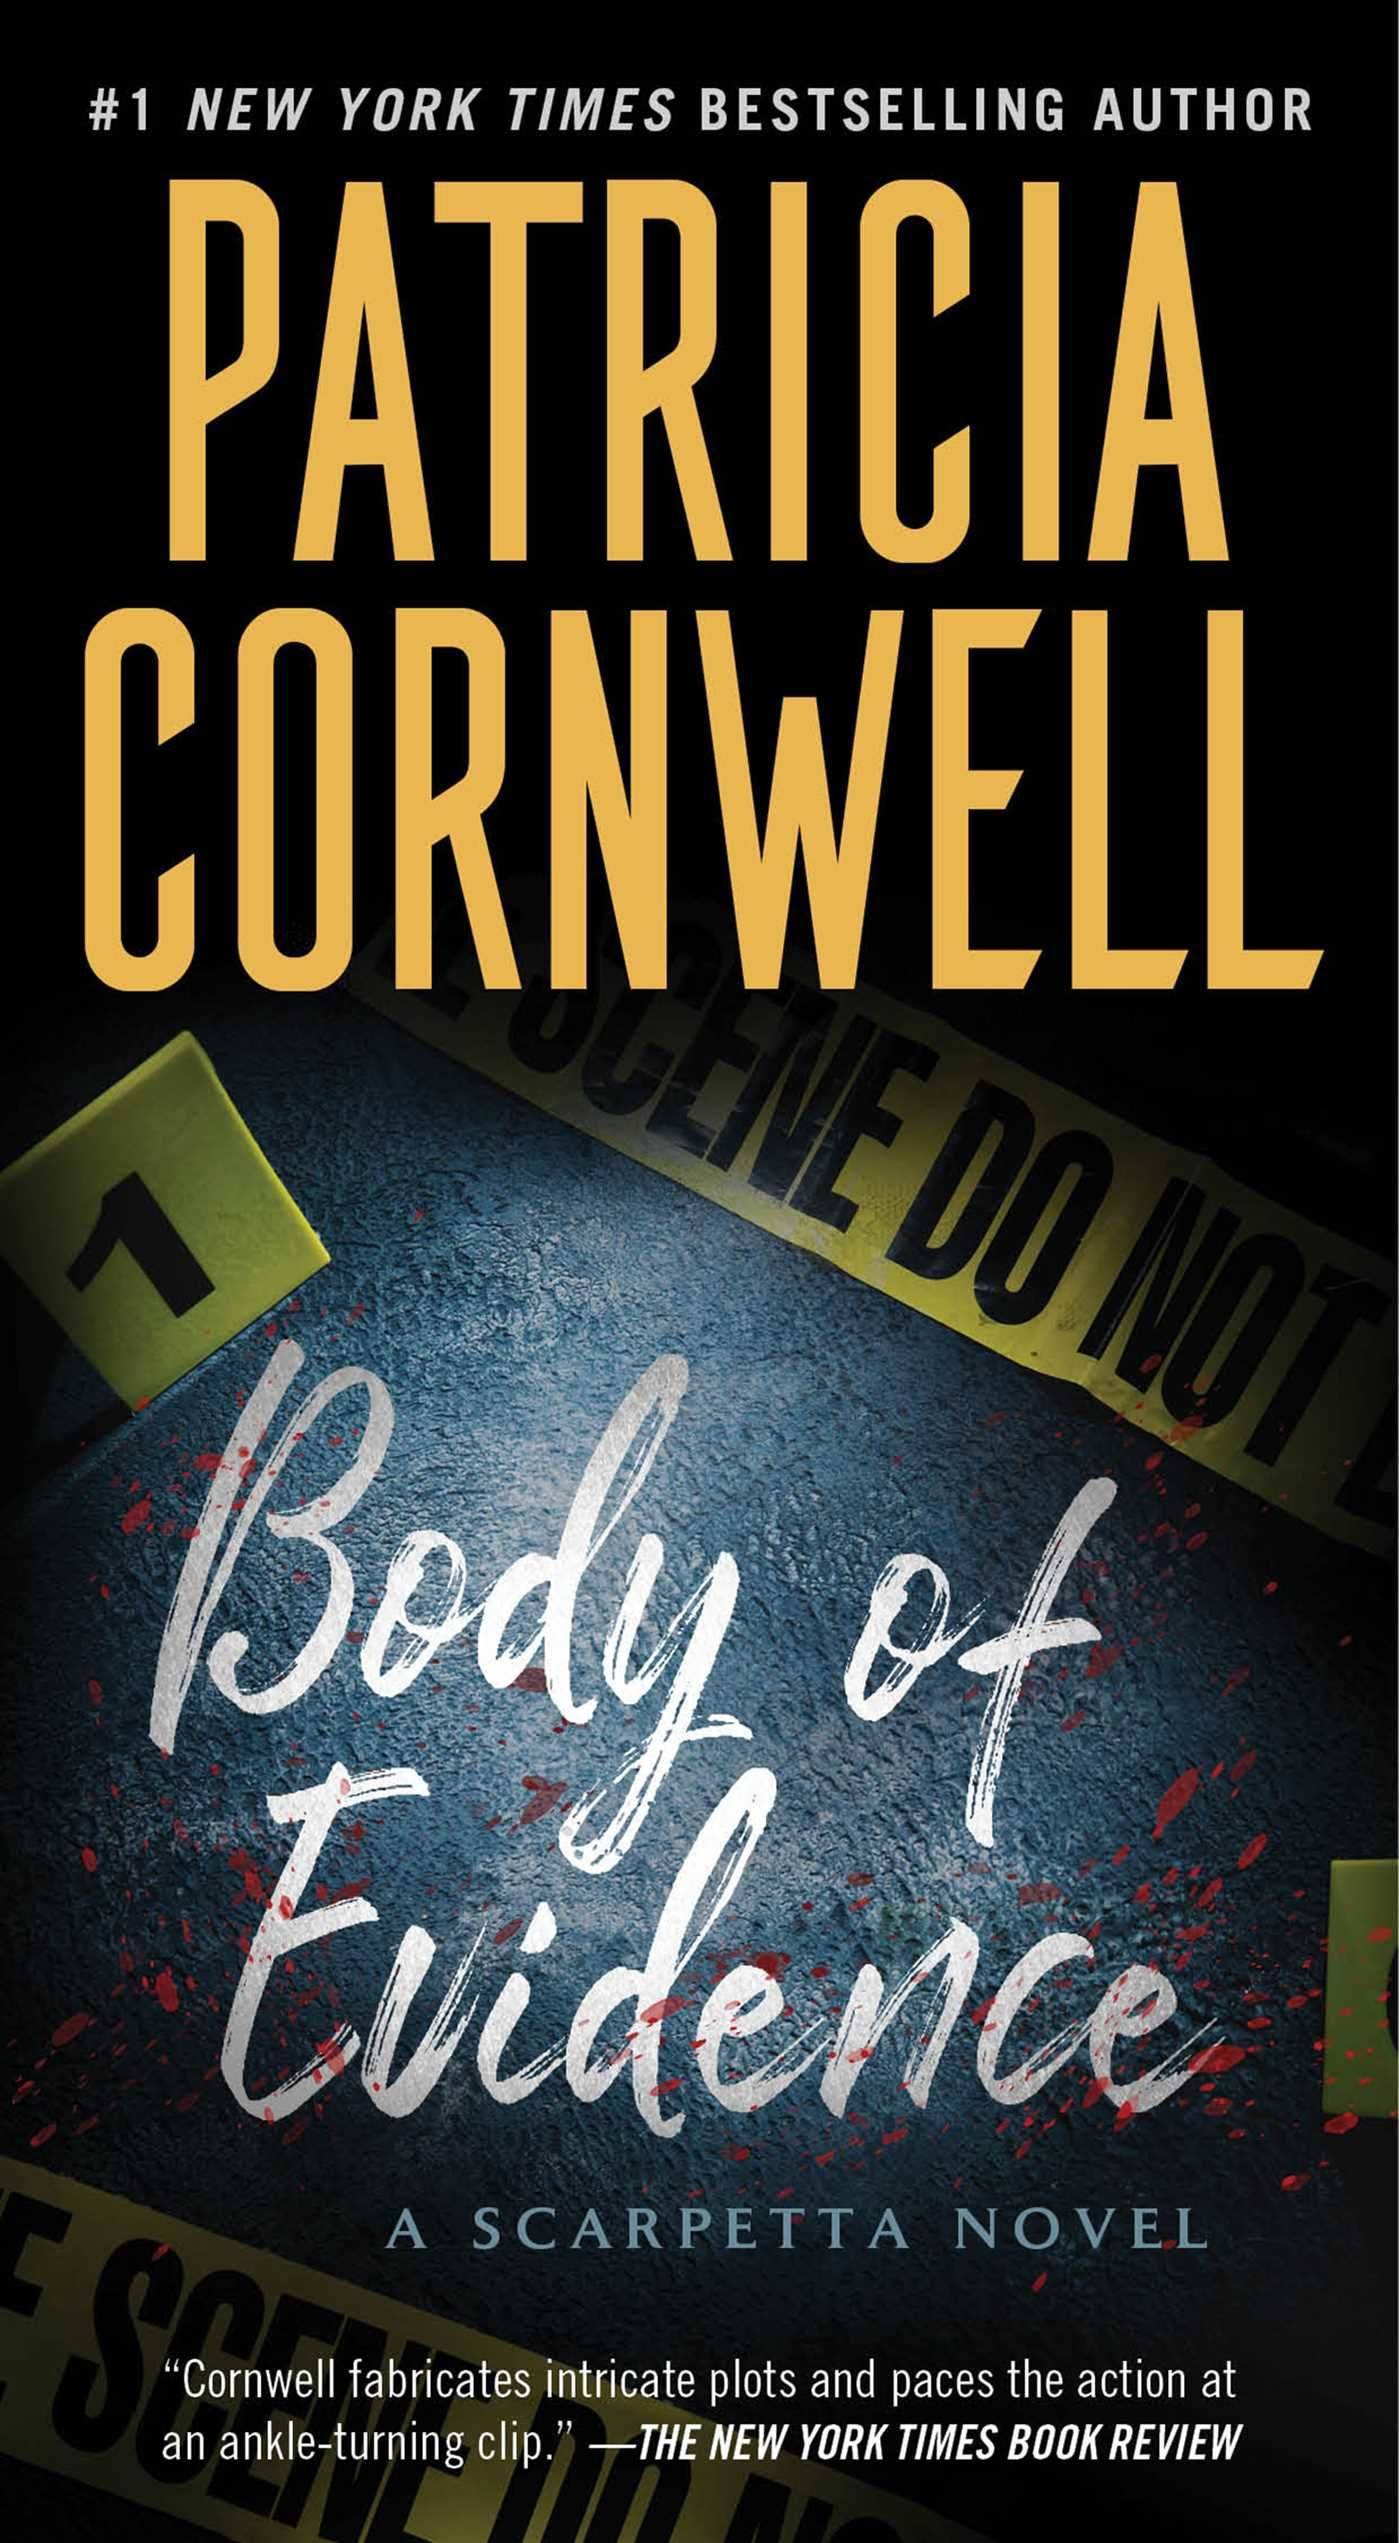 Body of Evidence [Book]